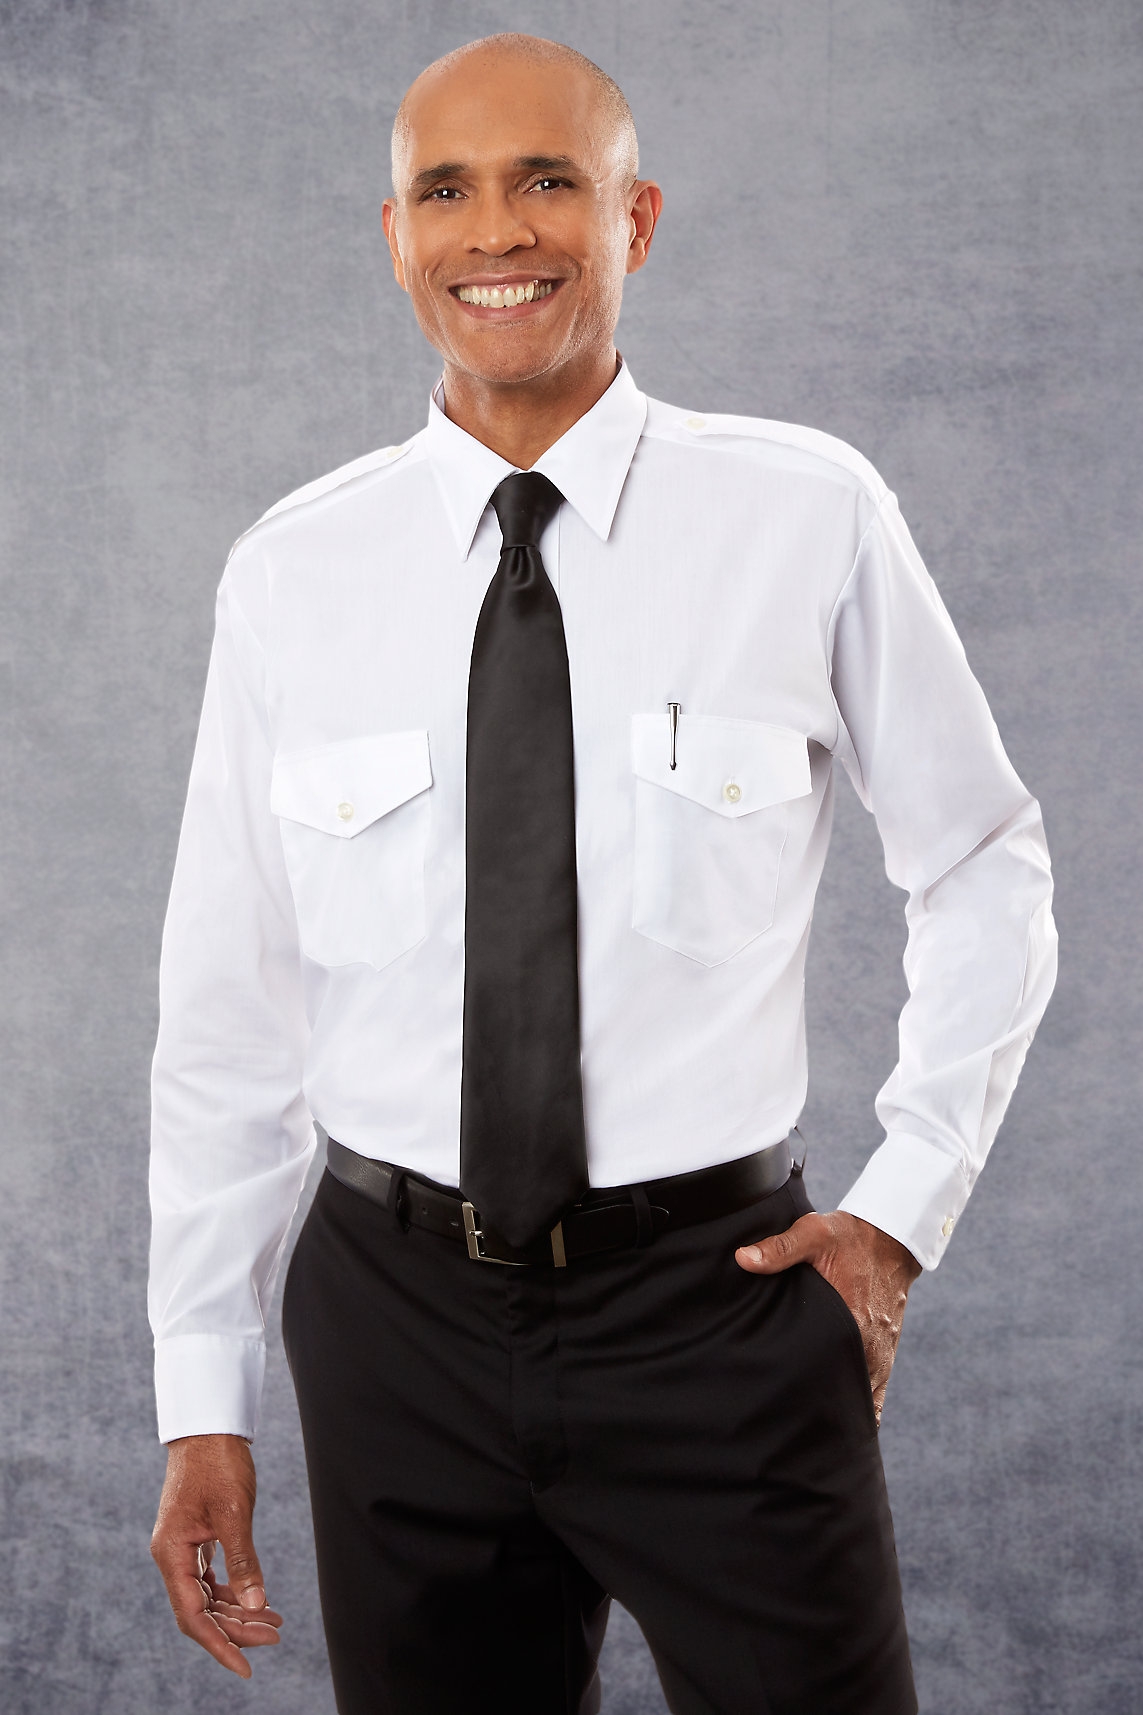 "THE AVIATOR SHIRT by Van Heusen - Short or Long Sleeve, Regular or Tall Fit, White or Blue-251